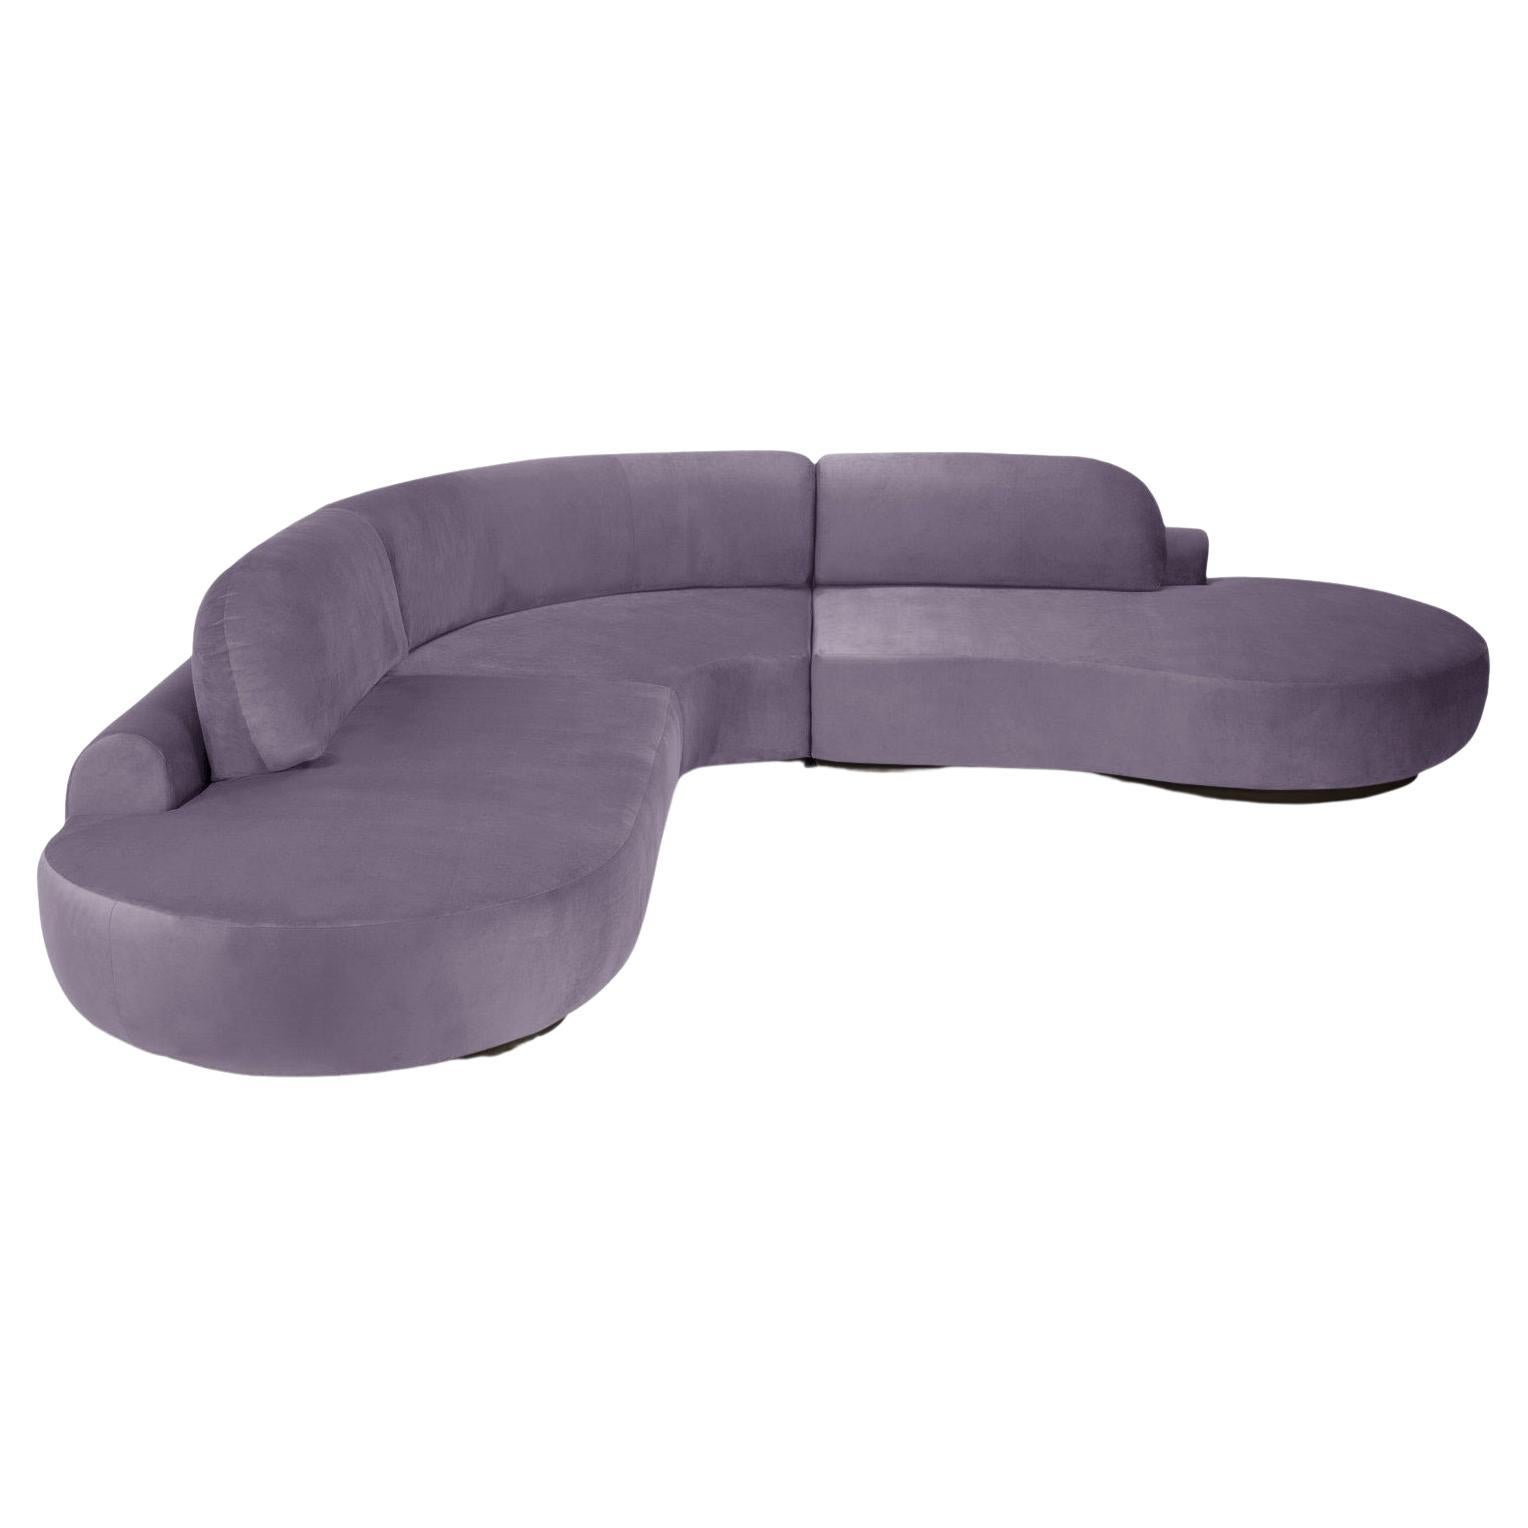 Naked Curved Sectional Sofa, 3 Piece with Beech Ash-056-5 and Paris Lavanda For Sale